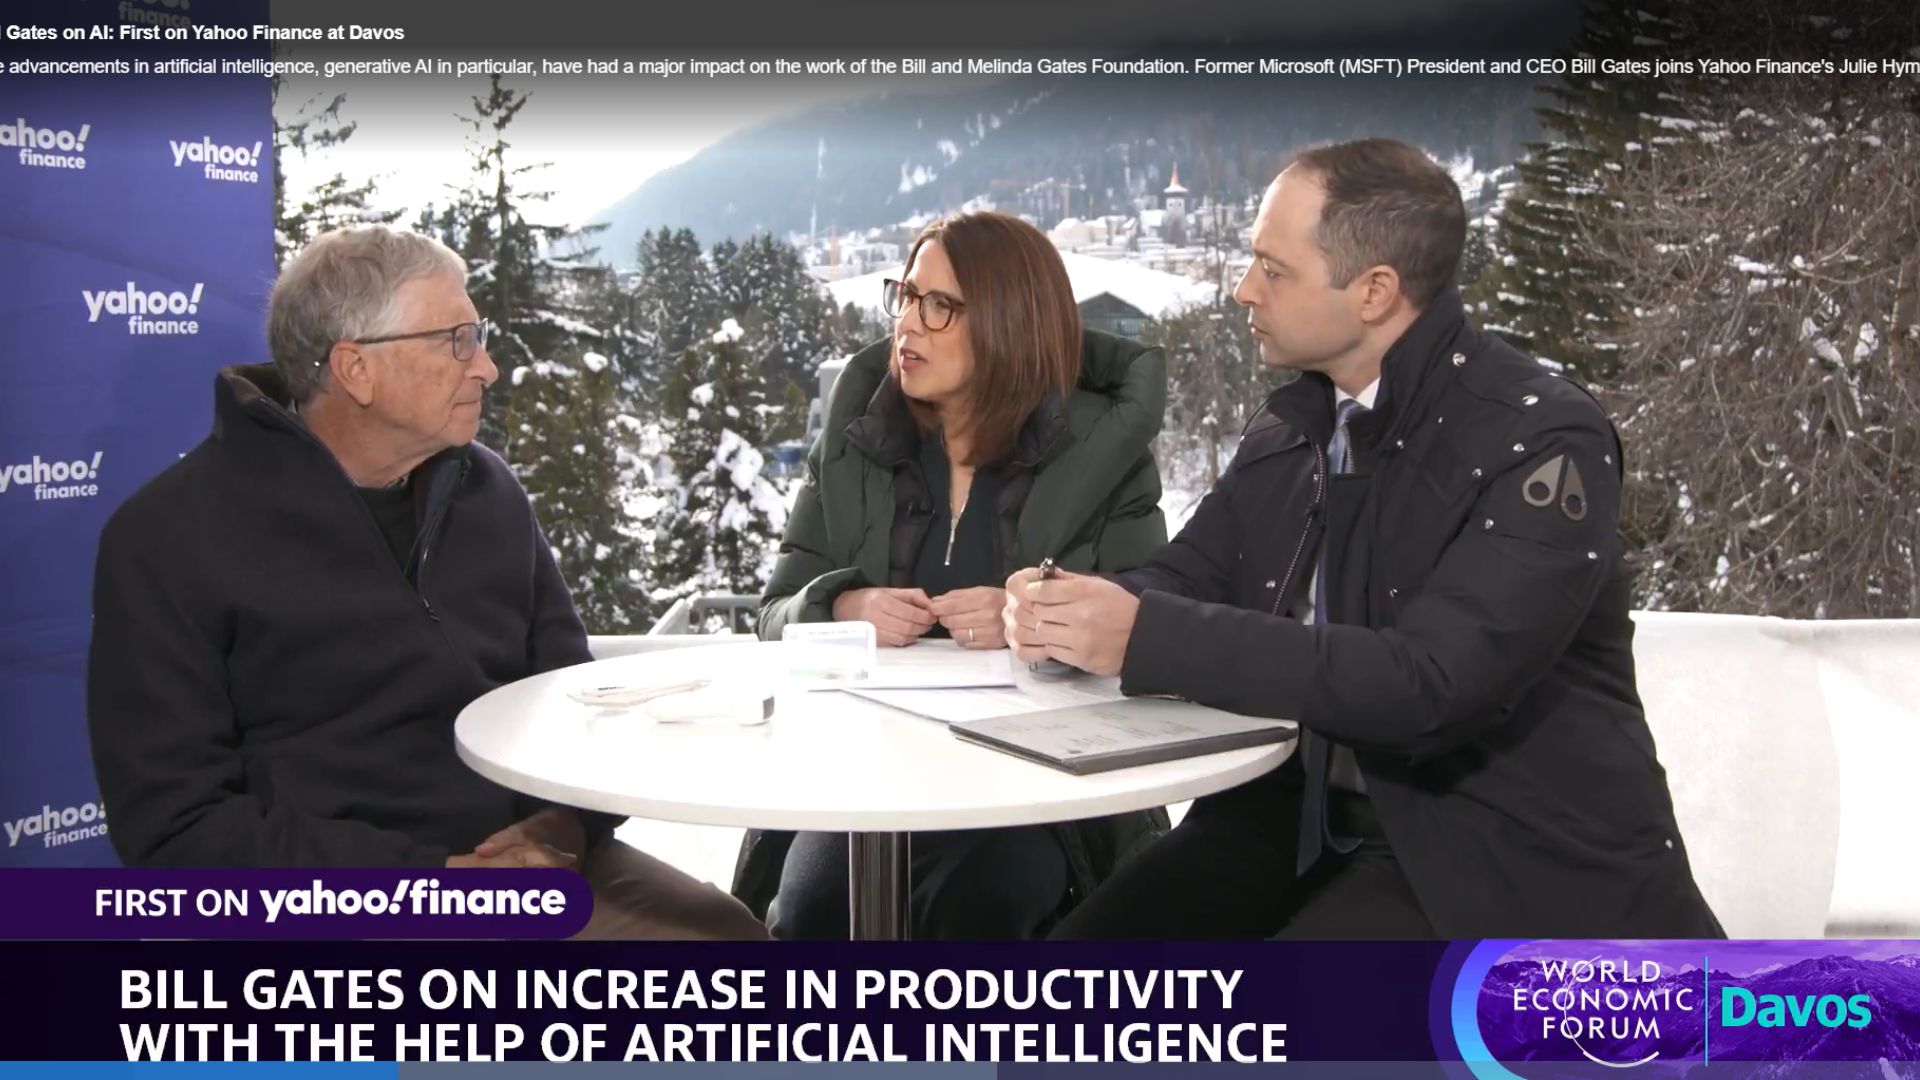 Bill Gates on AI: First on Yahoo Finance at Davos